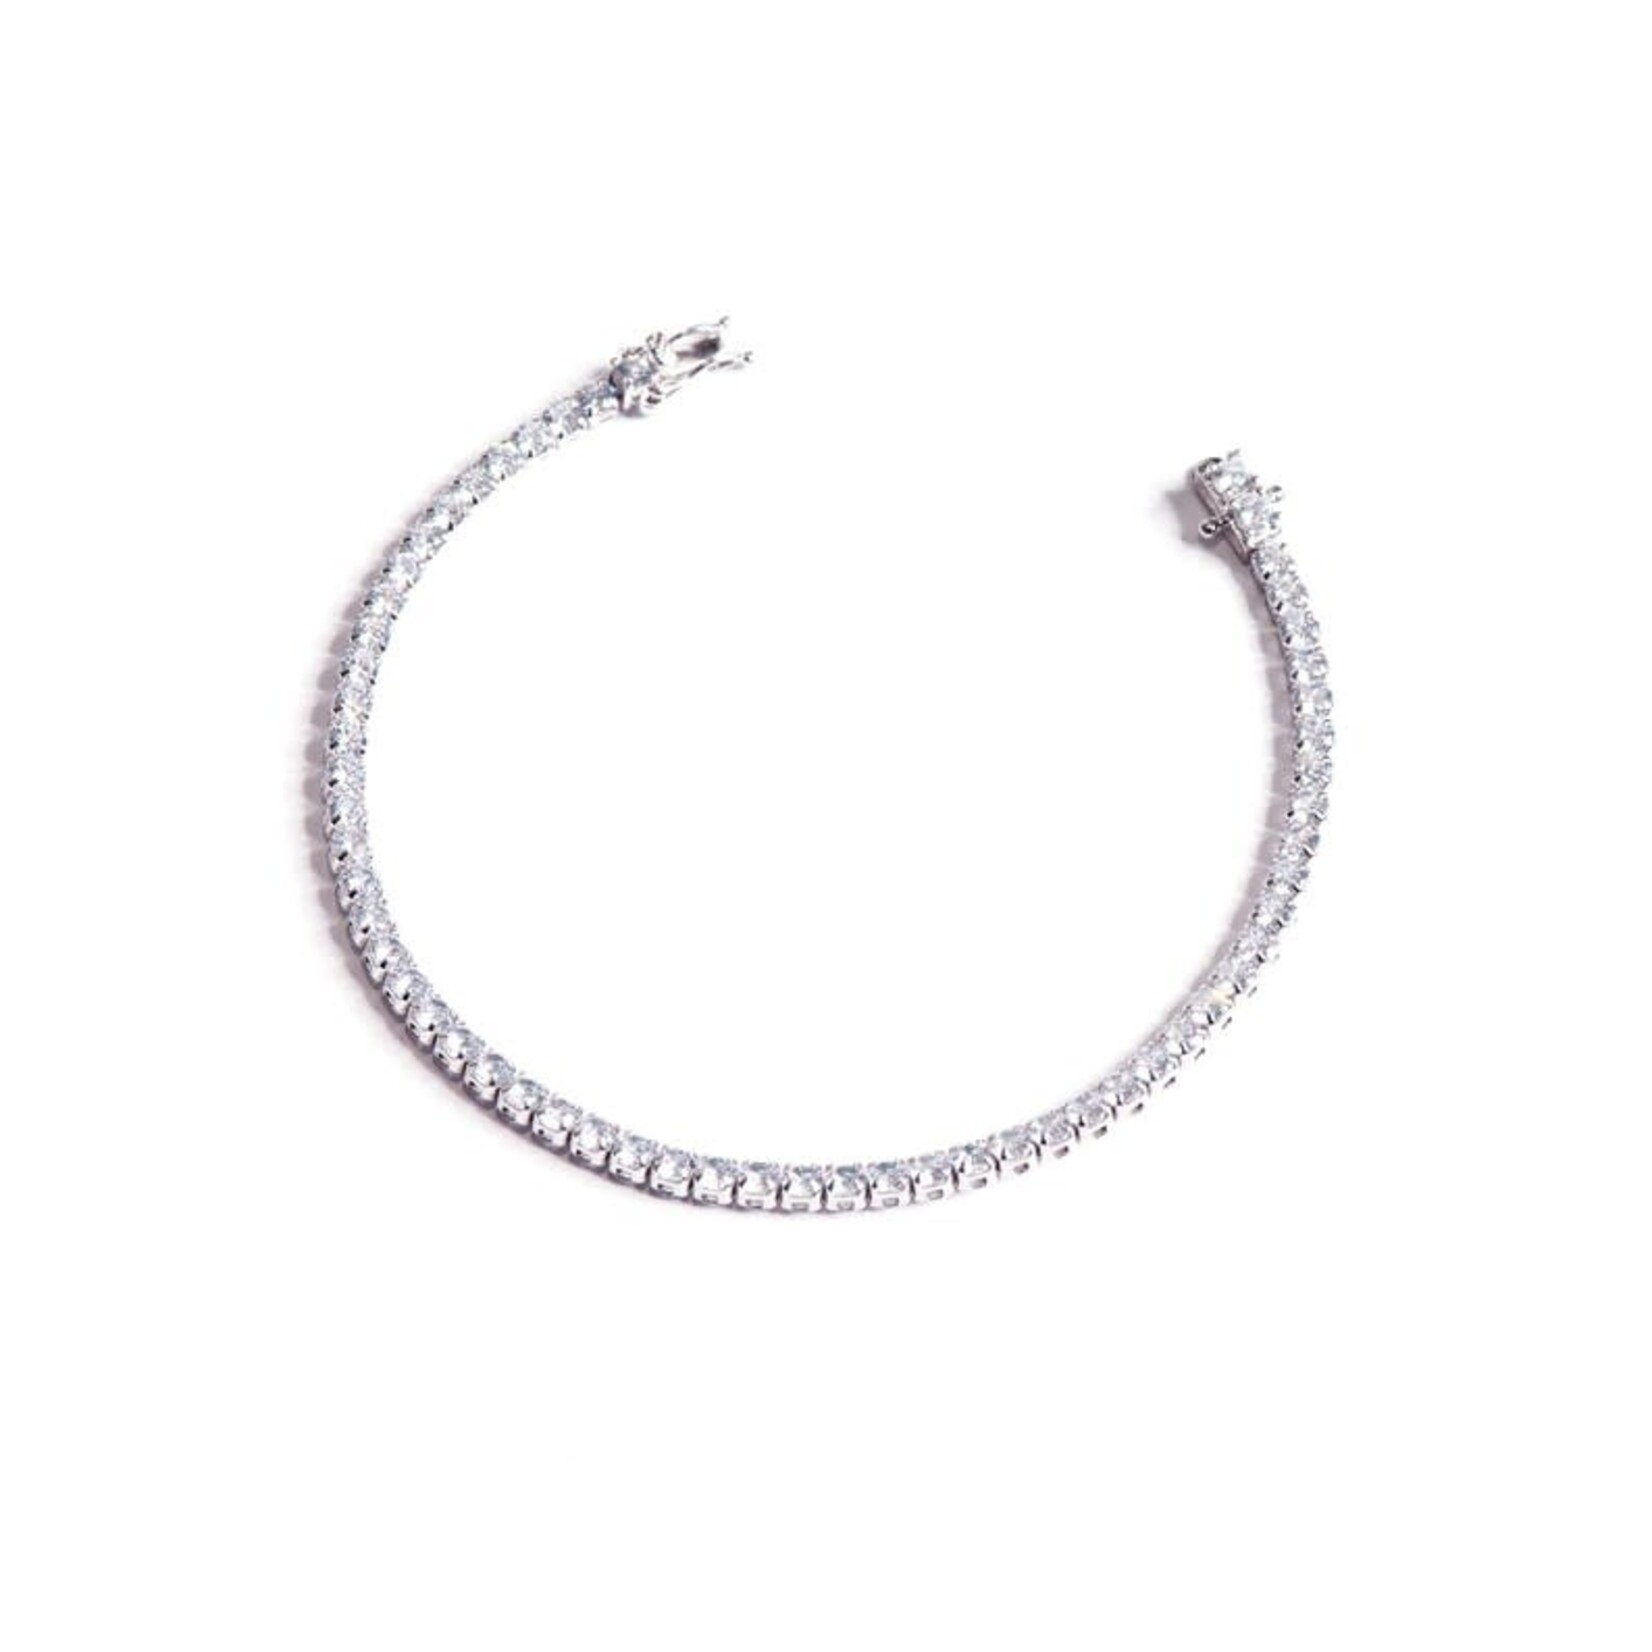 Silver and CZ Tennis Bracelet 2mm Rhodium Plated